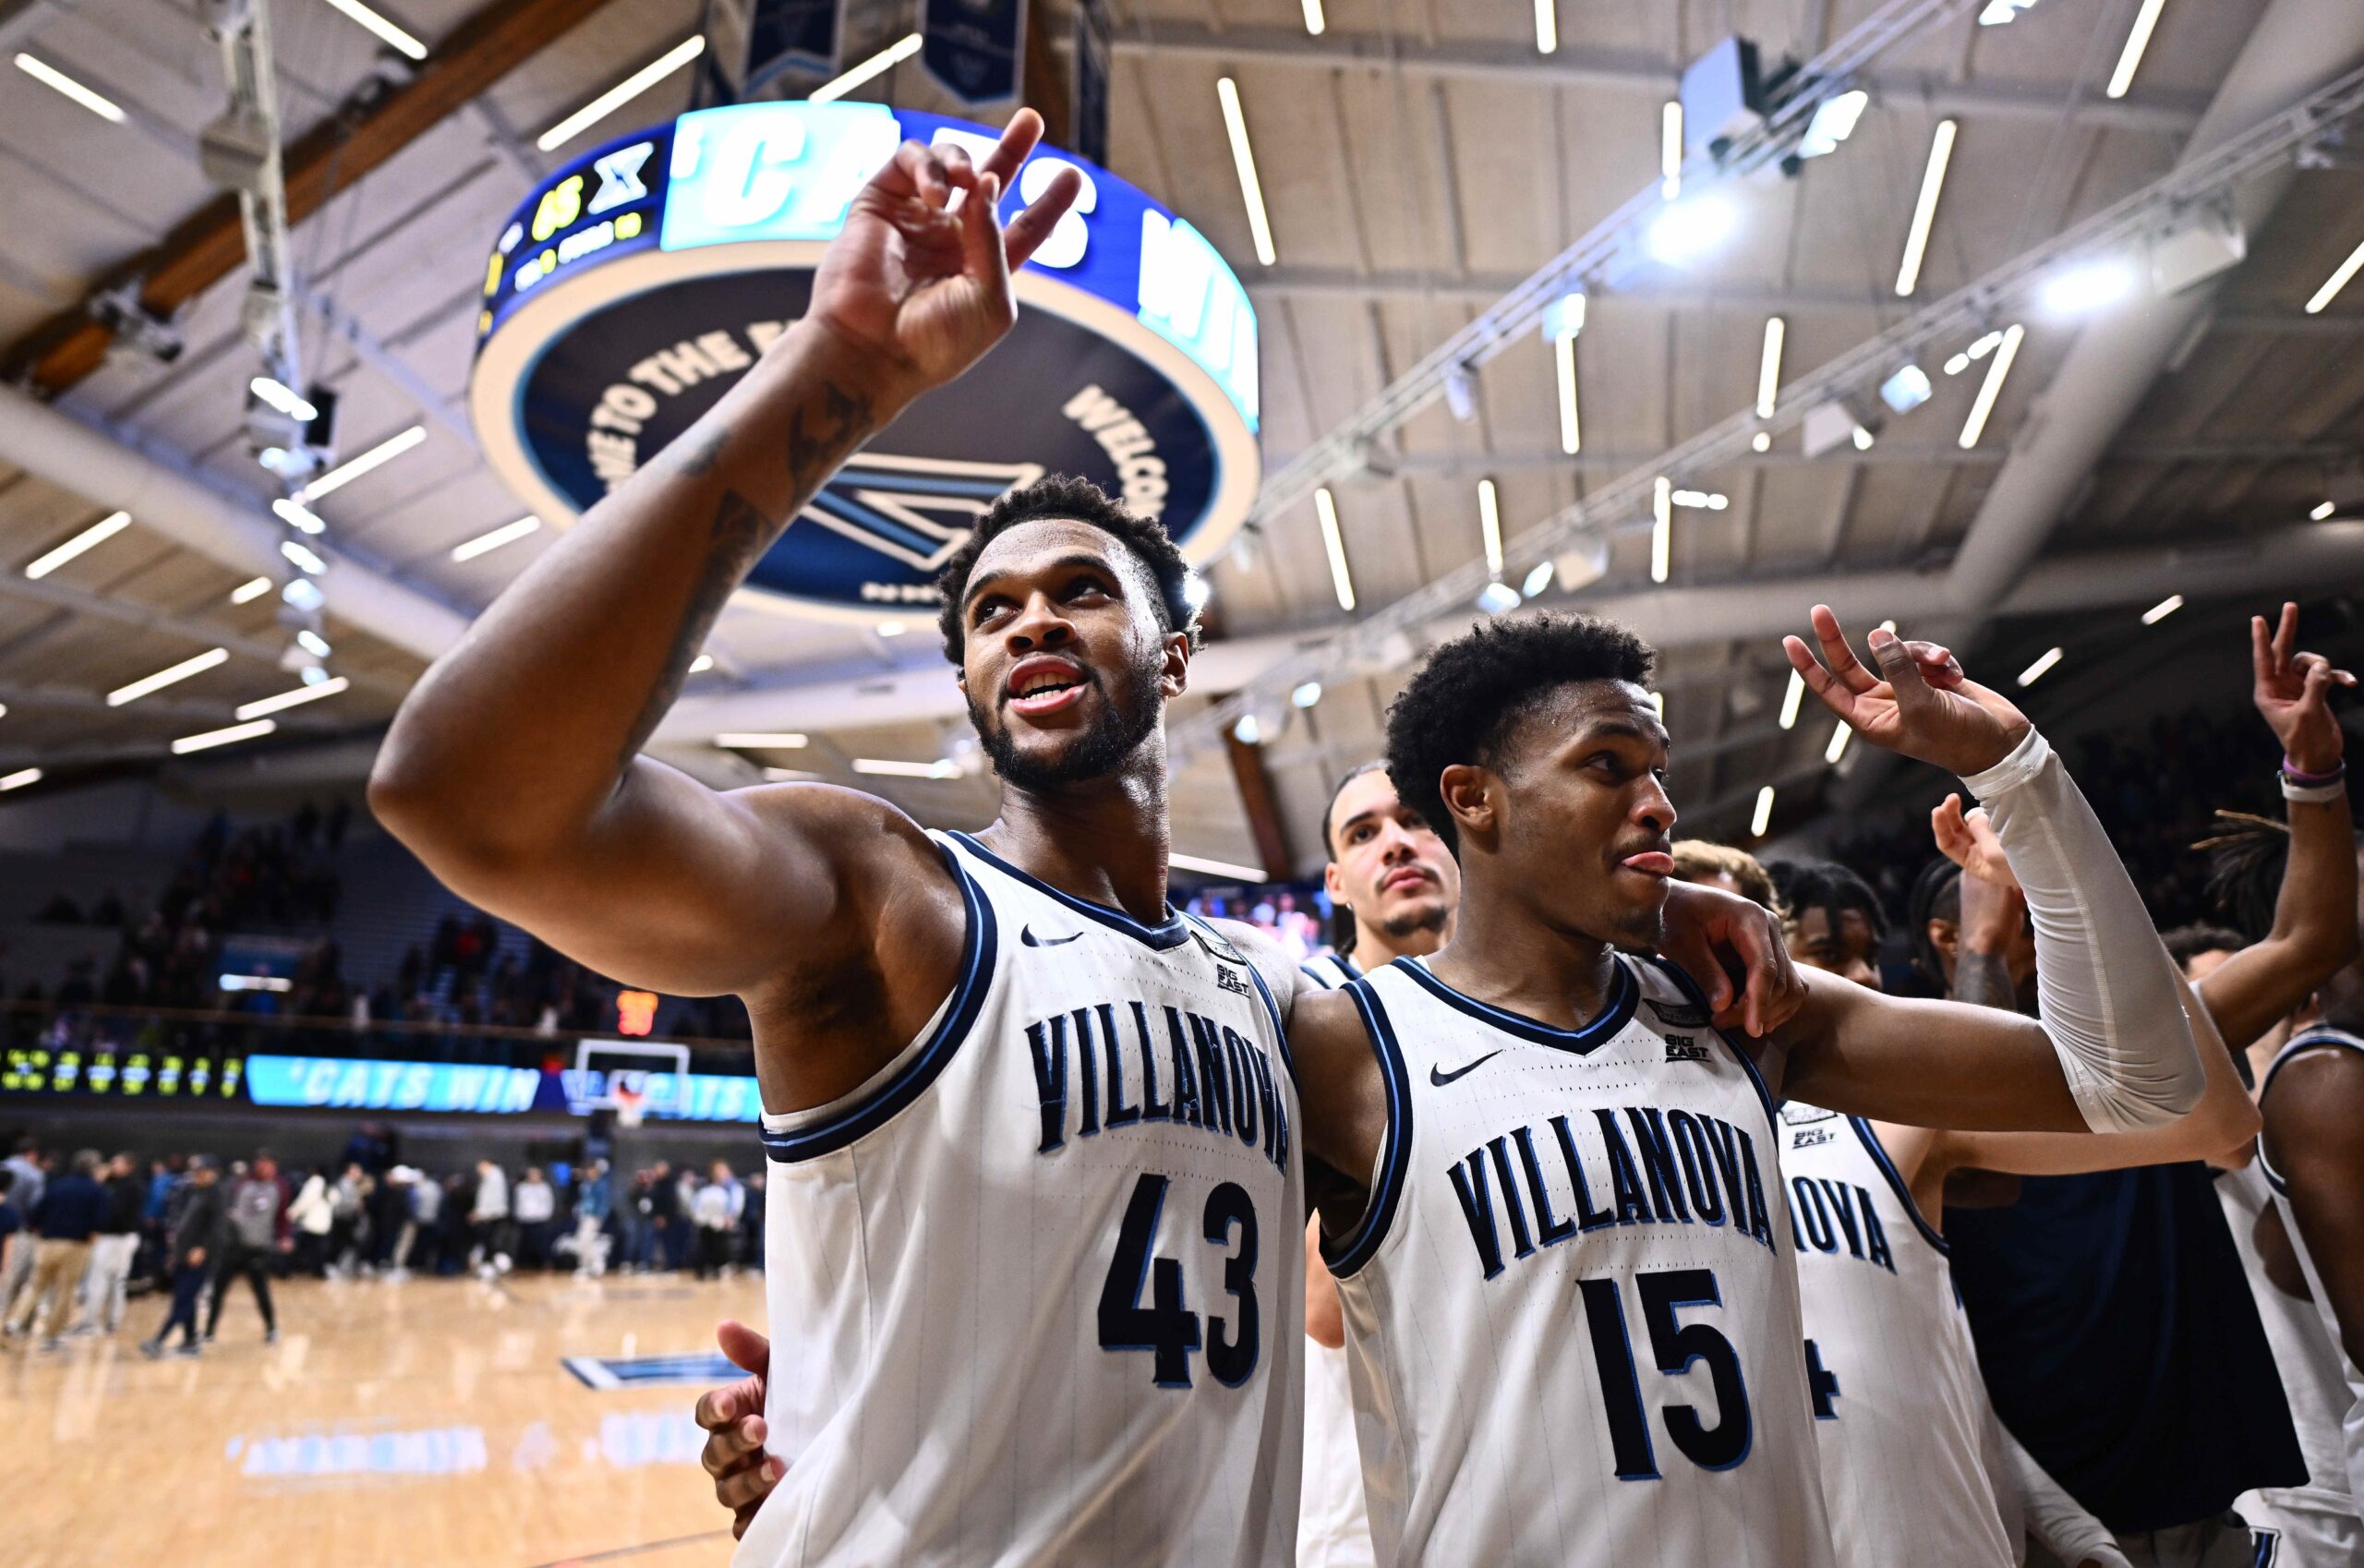 Villanova basketball could be contenders in the Big East next year.